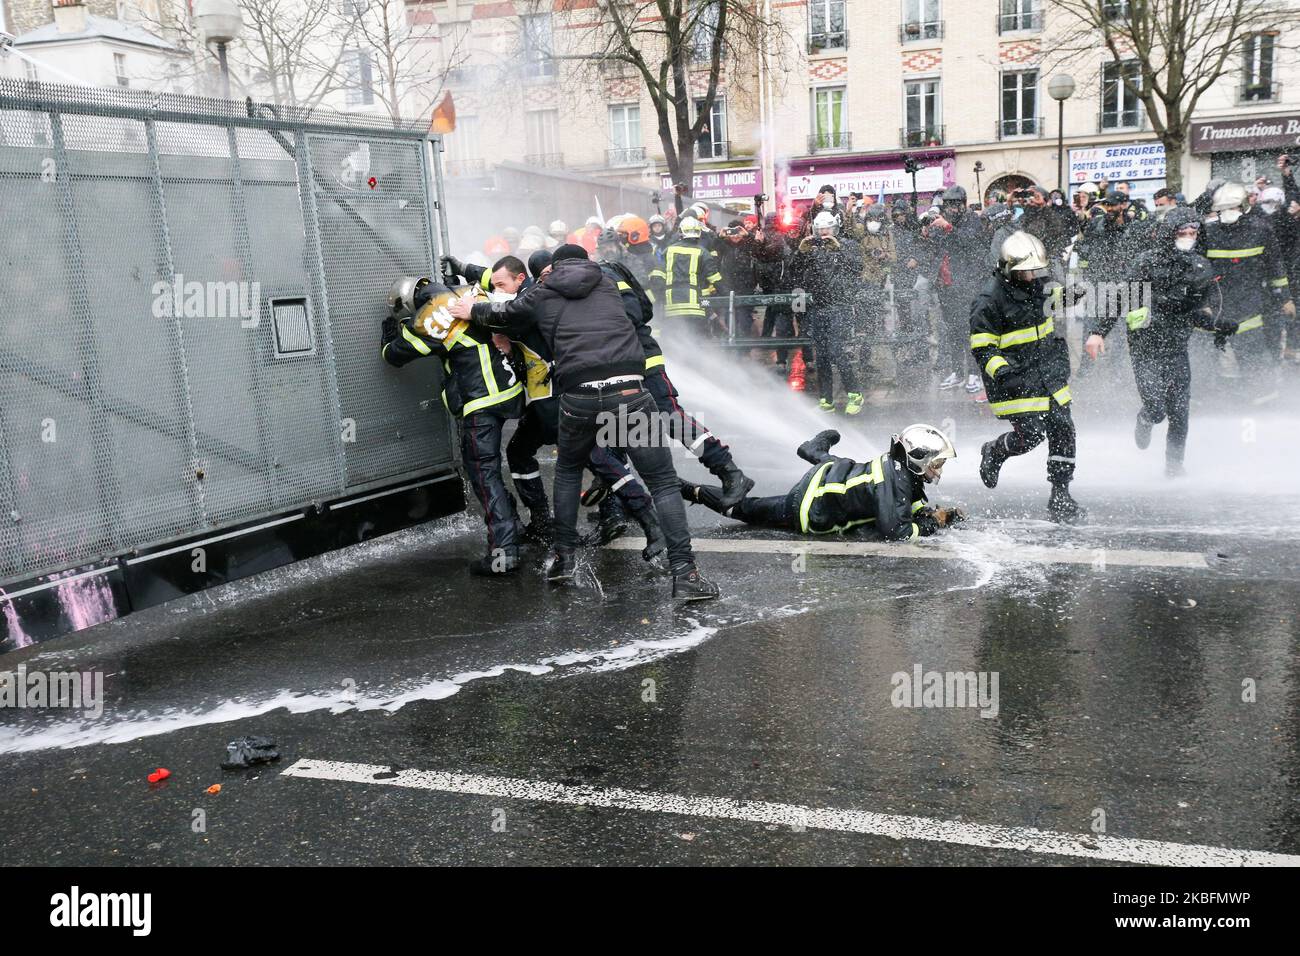 Firefighters try to open a path in a riot barricade and were repelled by water canons during a demonstration to protest against French government's plan to overhaul the country's retirement system in Paris, on January 28, 2020. (Photo by Michel Stoupak/NurPhoto) Stock Photo